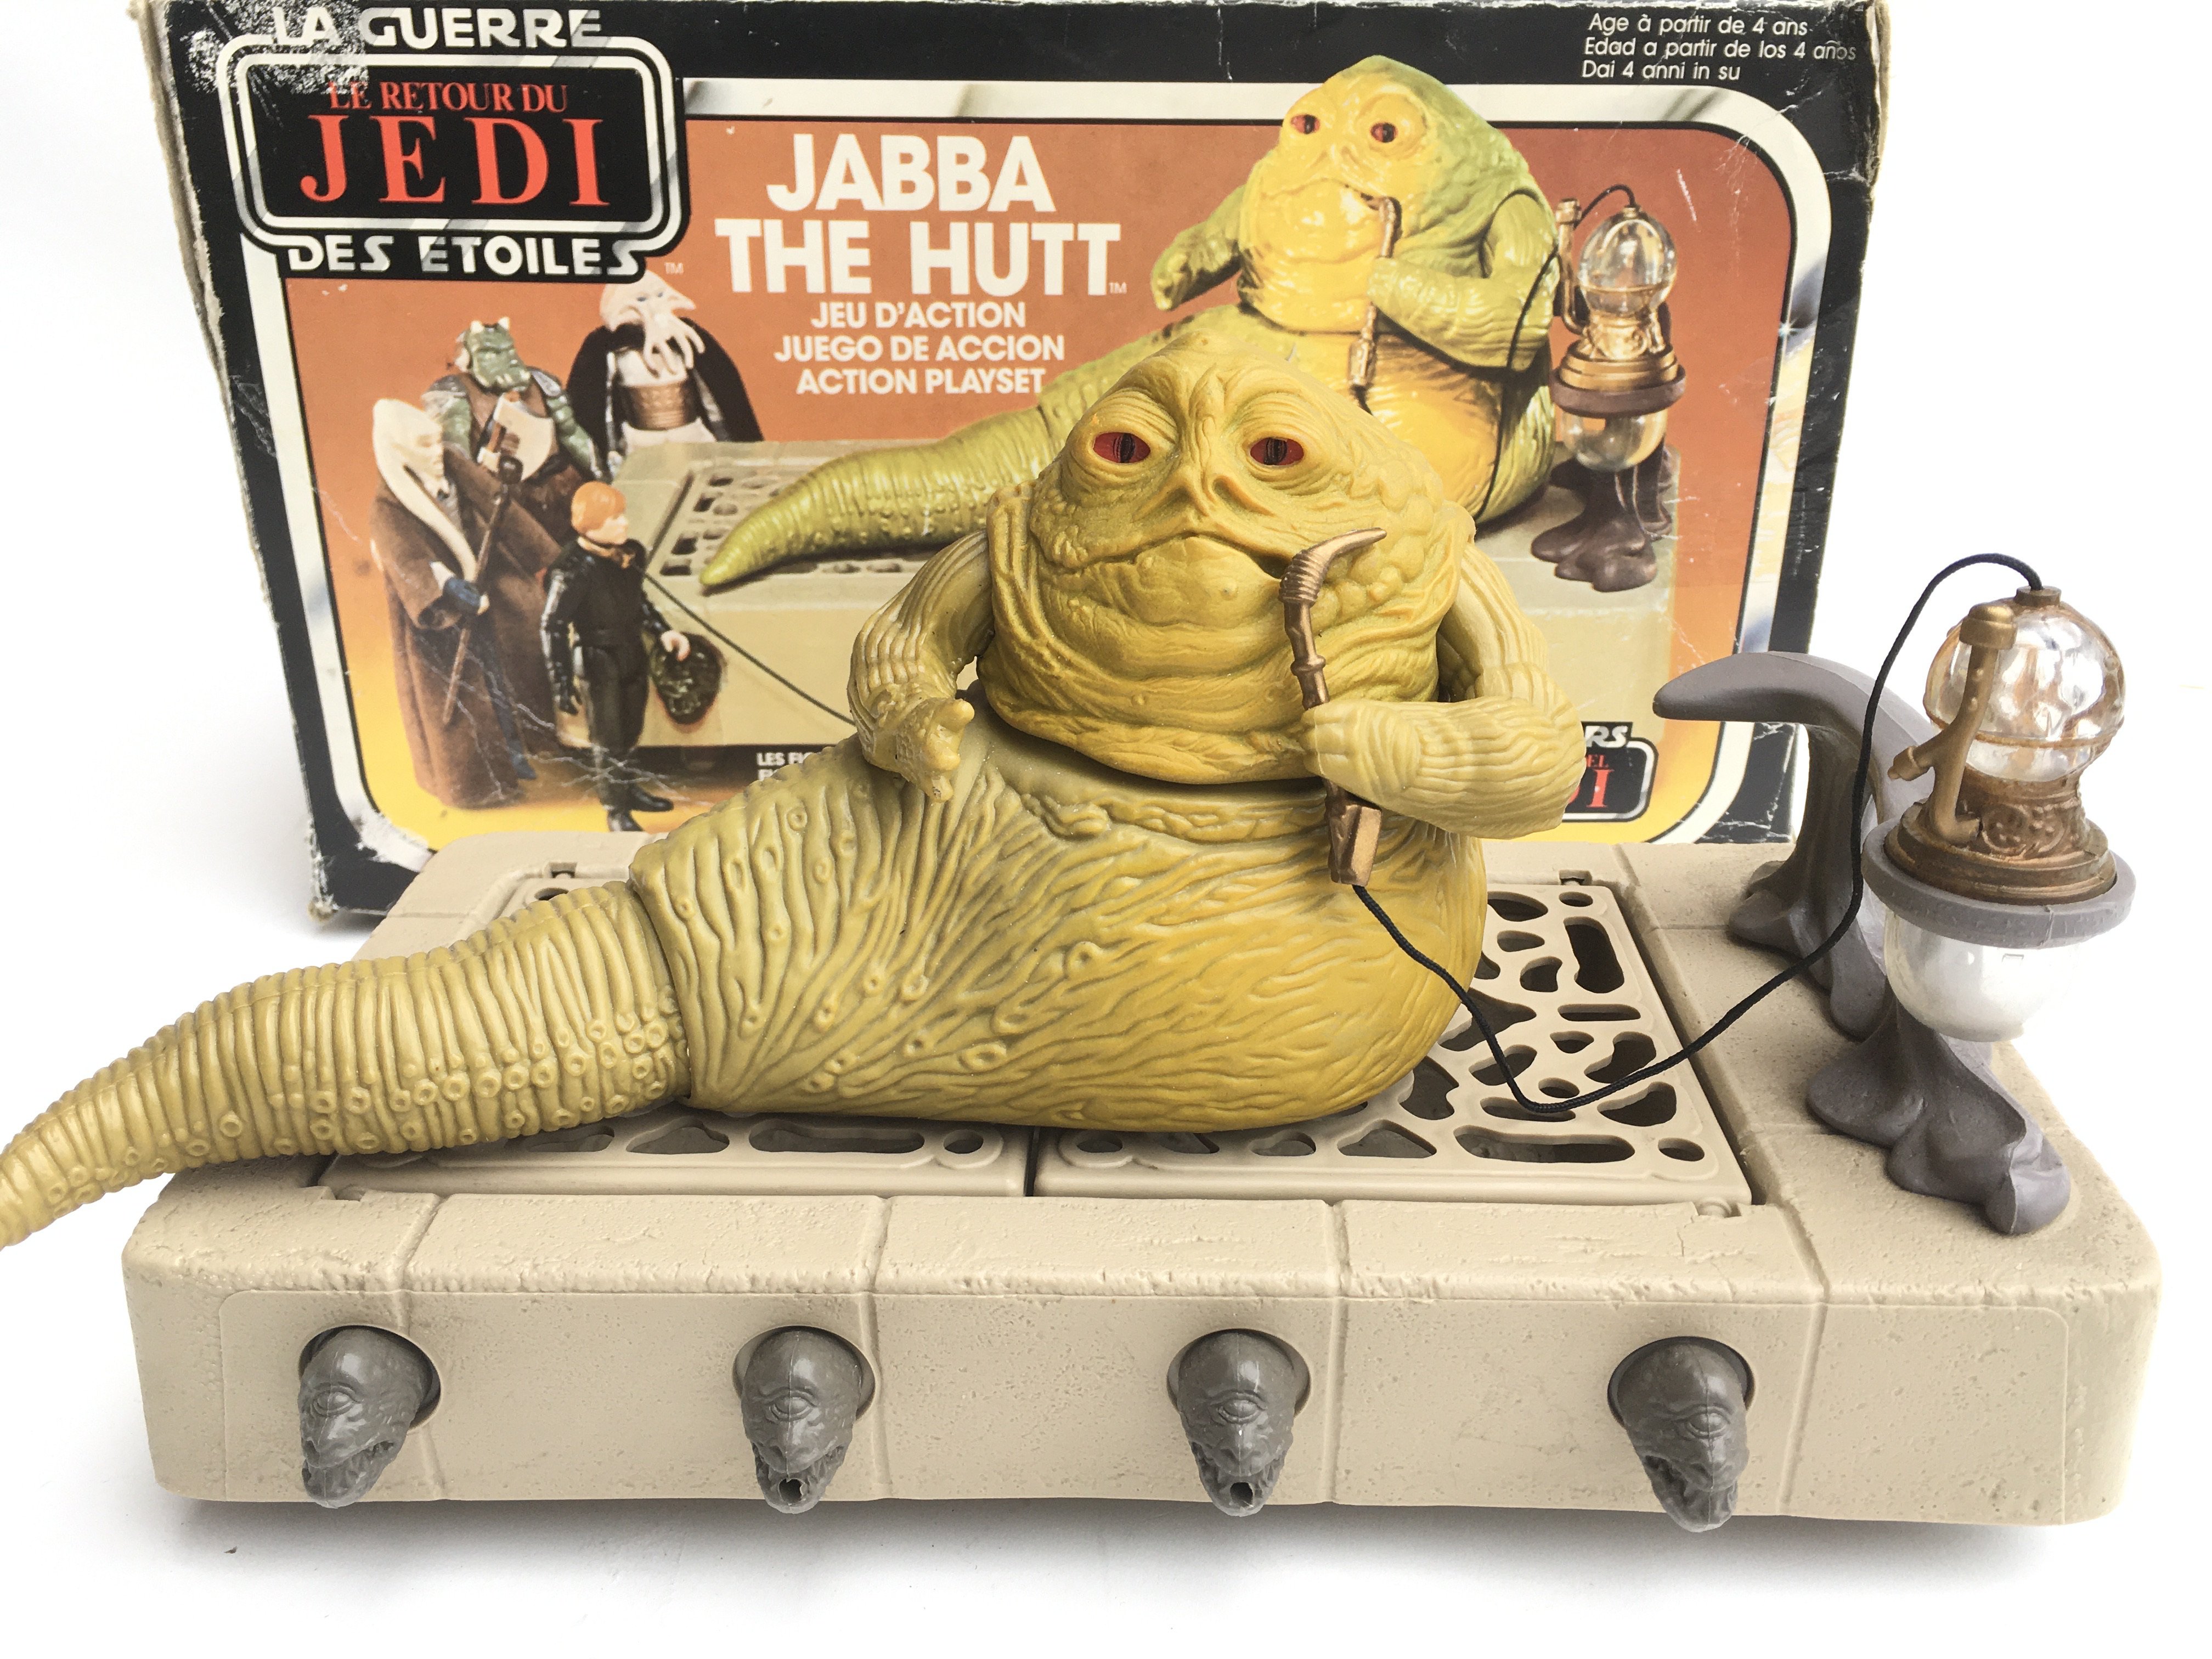 A Boxed Vintage Star Wars Jabba The Hutt Playset. - Image 2 of 2